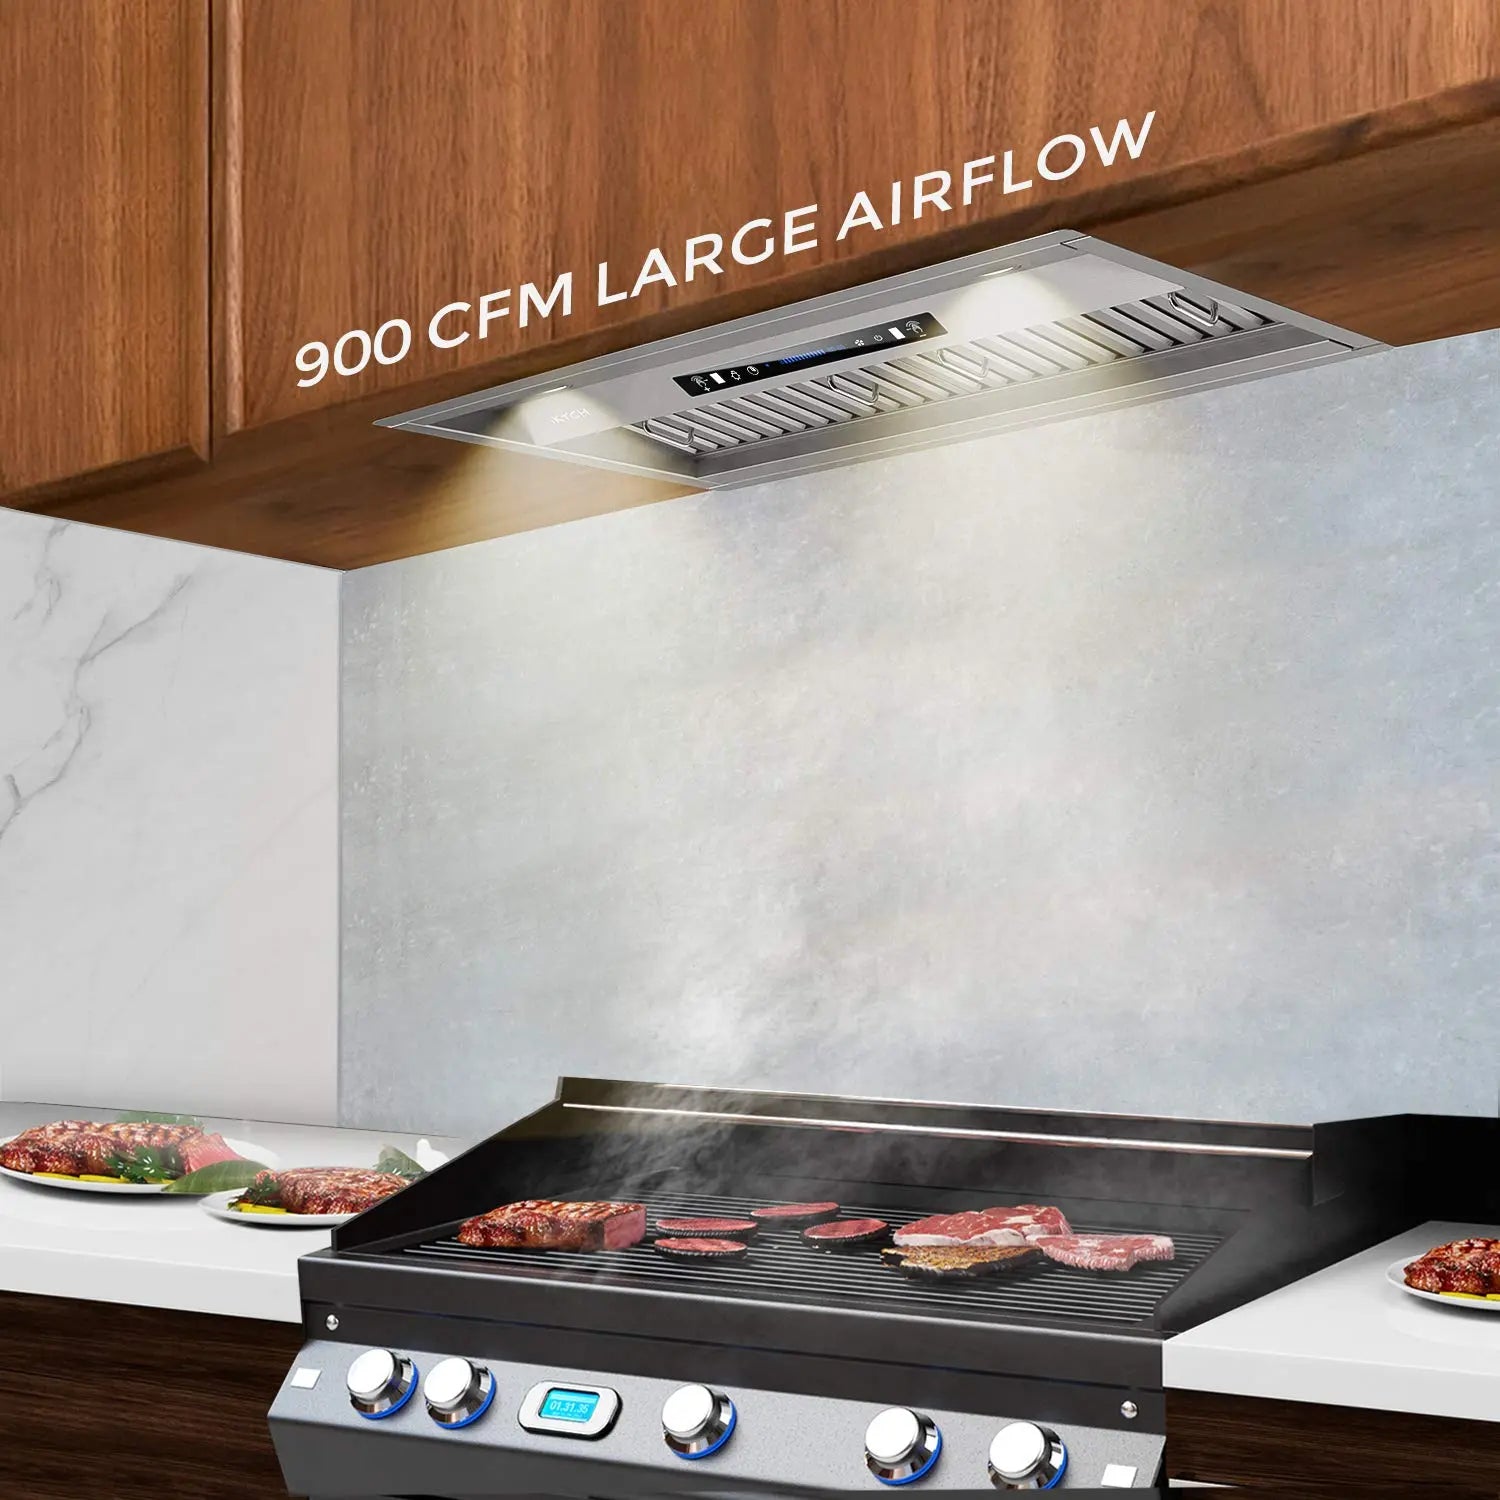 IKTCH 30 Inches 900 CFM Ducted Island Range Hood in Stainless Steel with  Baffle